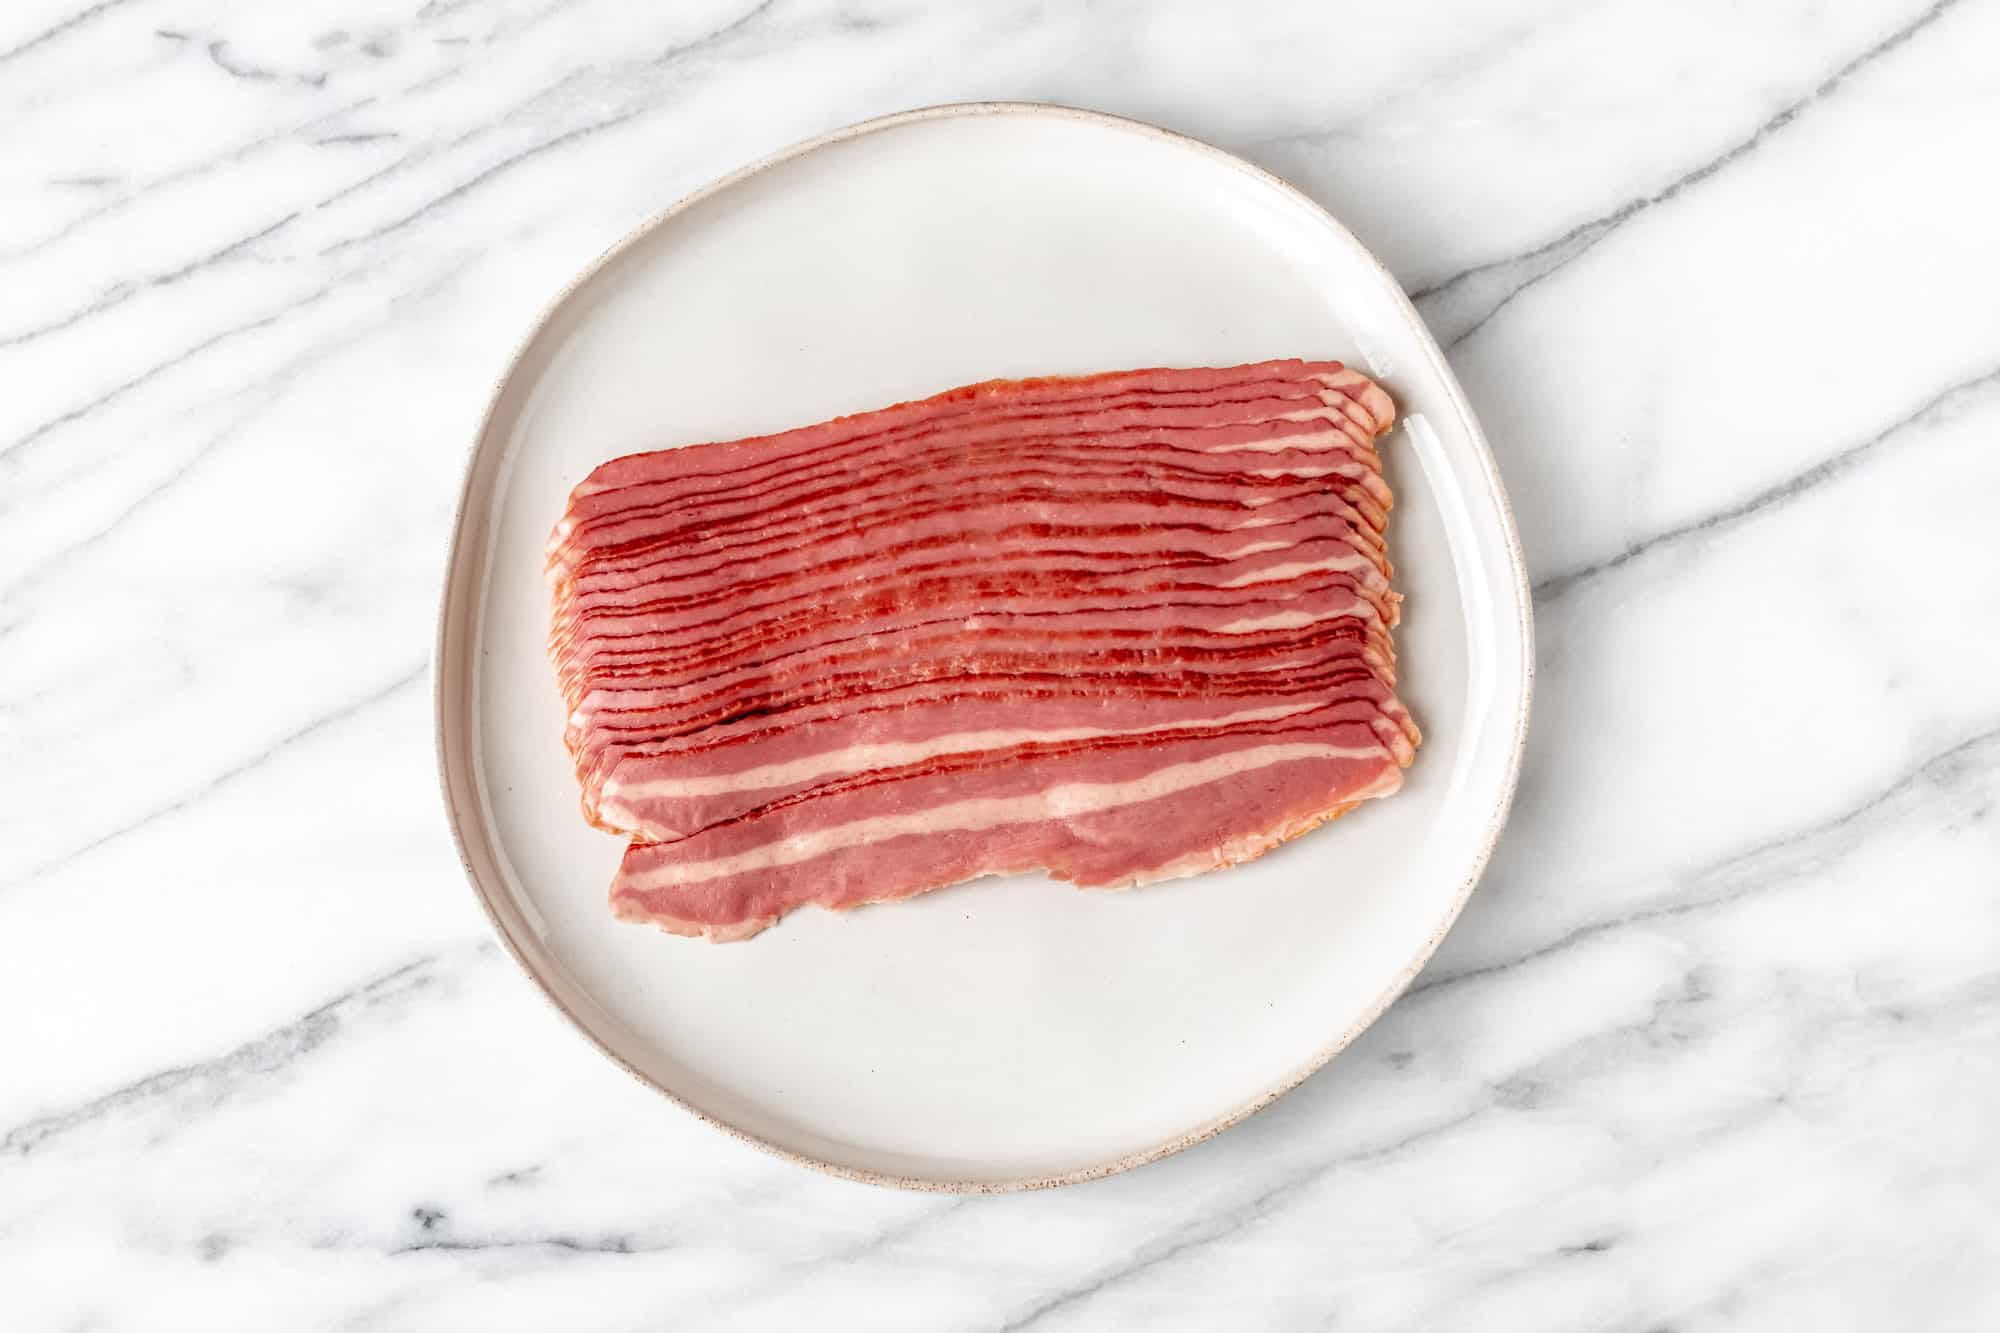 Turkey bacon on a white plate on a marble background.